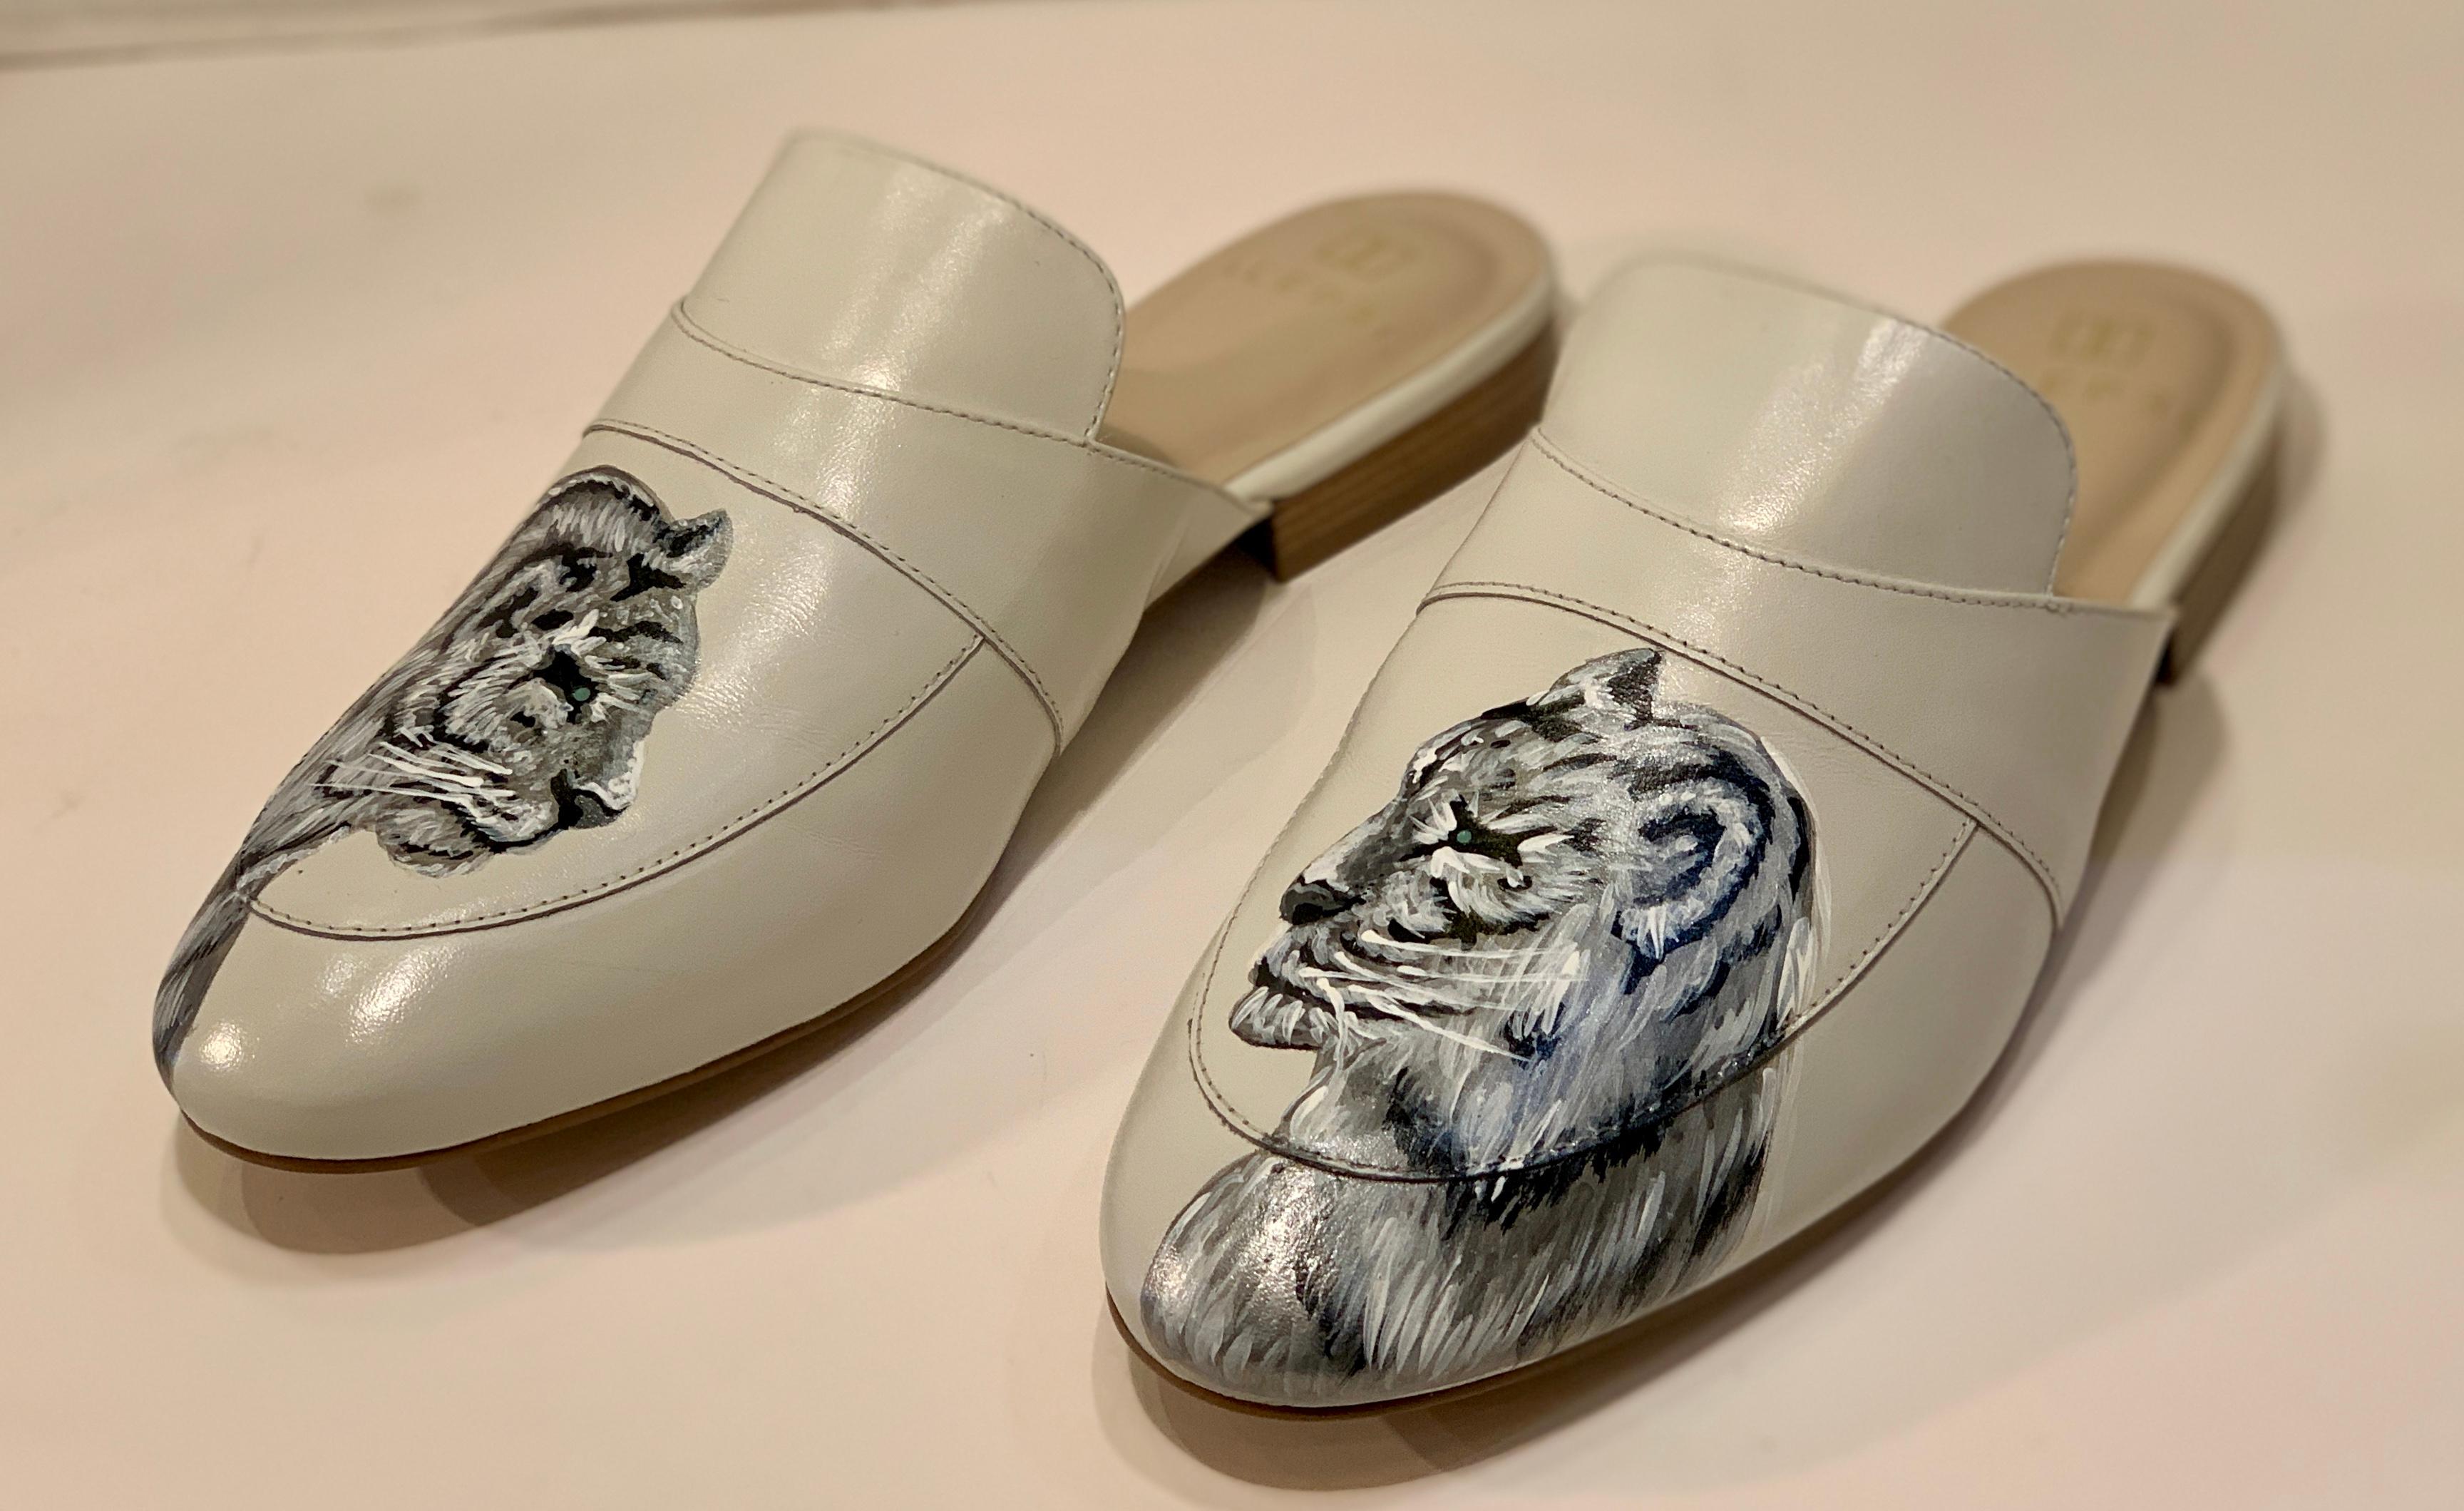 
In a special partnership with Miami-based stylist, Irma Martinez, and ALEPEL, these special edition, elegant mules were designed using the mystique of jungle cats as inspiration.  Hand painted by a Cuban-born ALEPEL artist, the realistic rendering